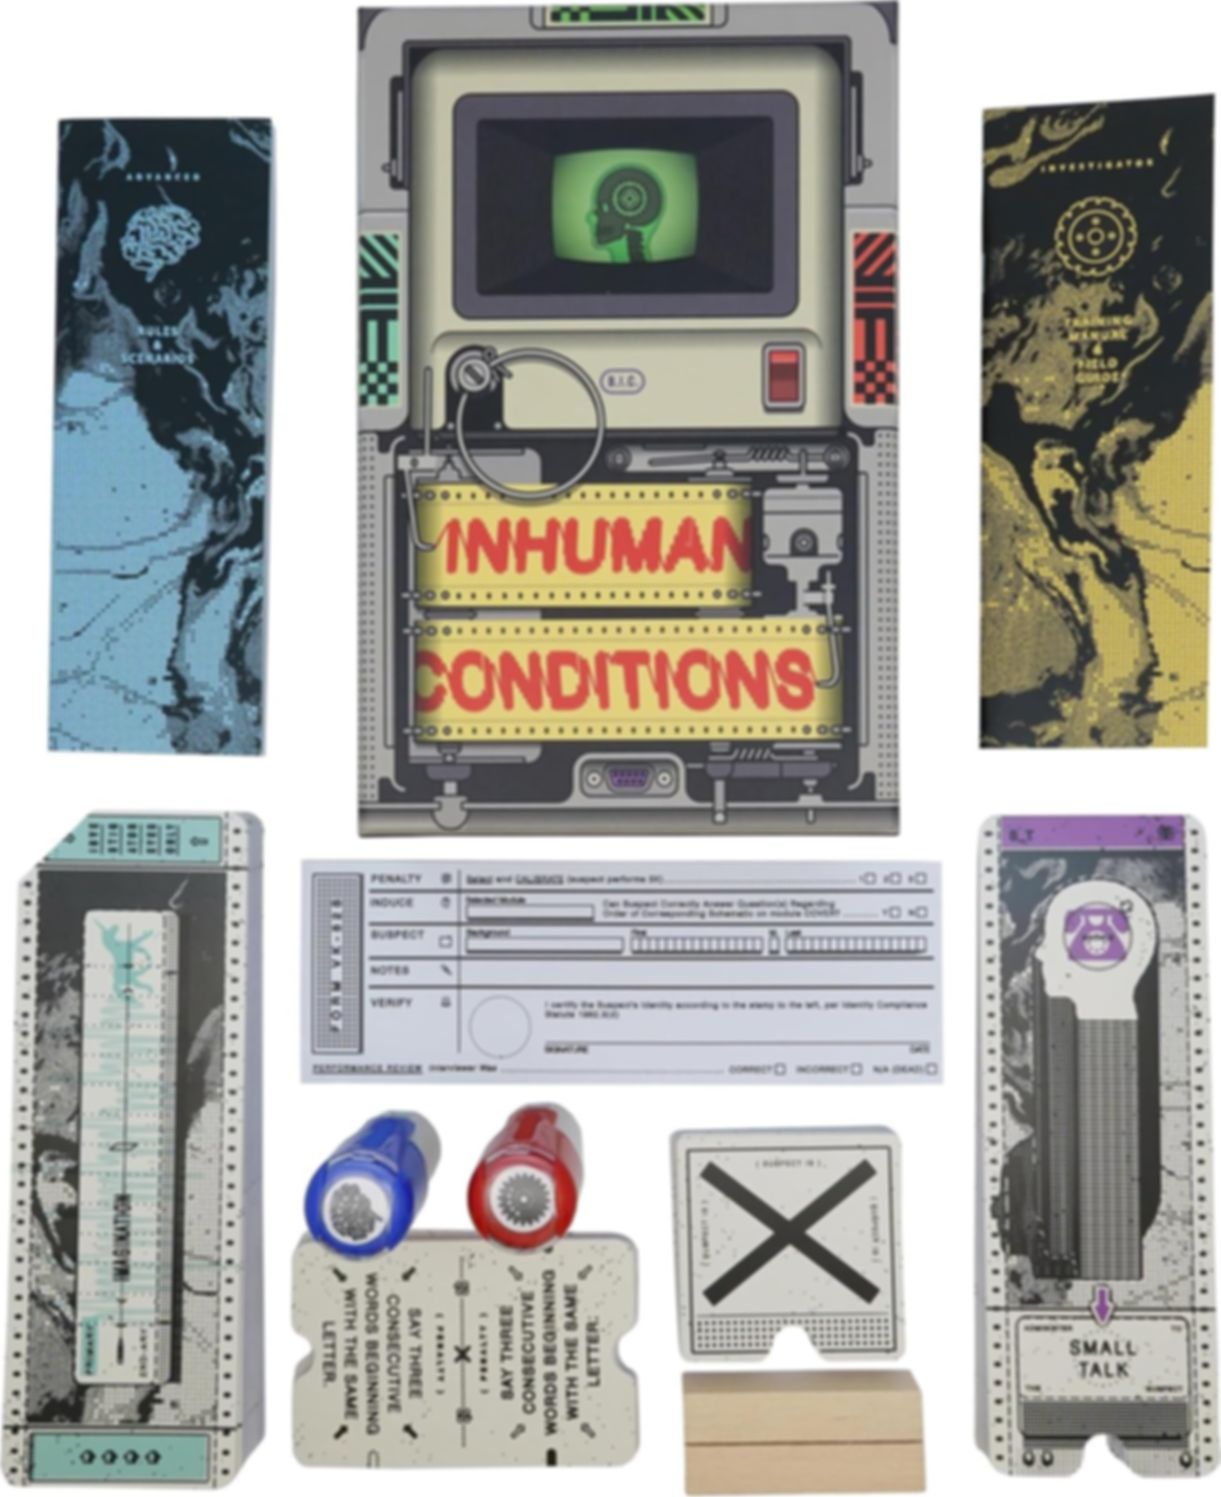 Inhuman Conditions components